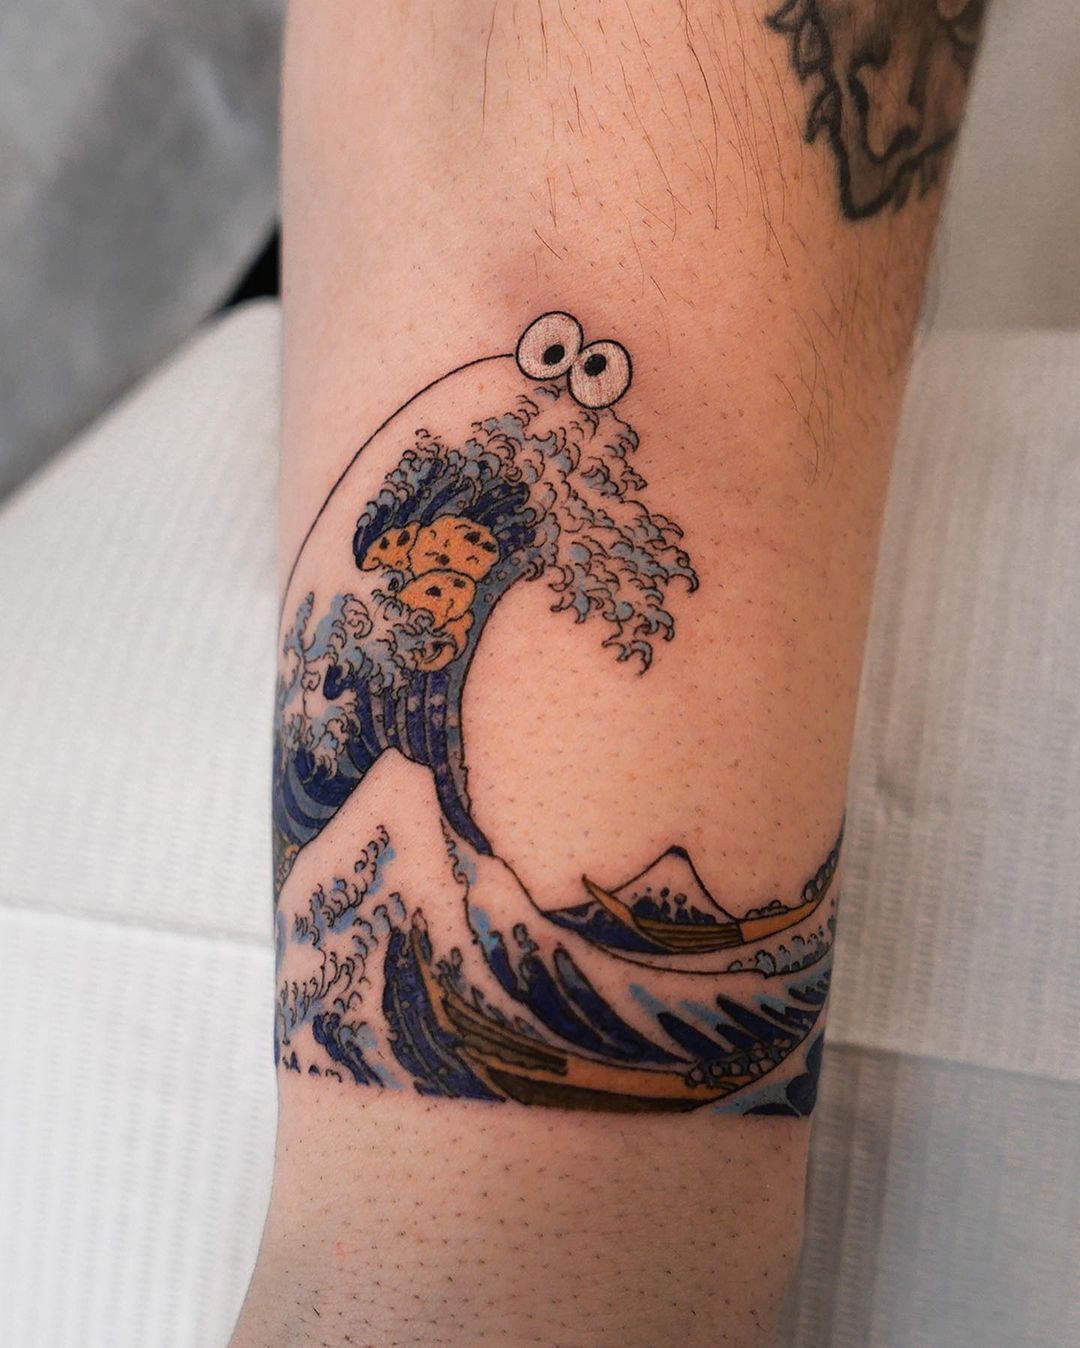 Ocean Tattoos 50 Most Amazing Water World Tattoos Youll Ever See